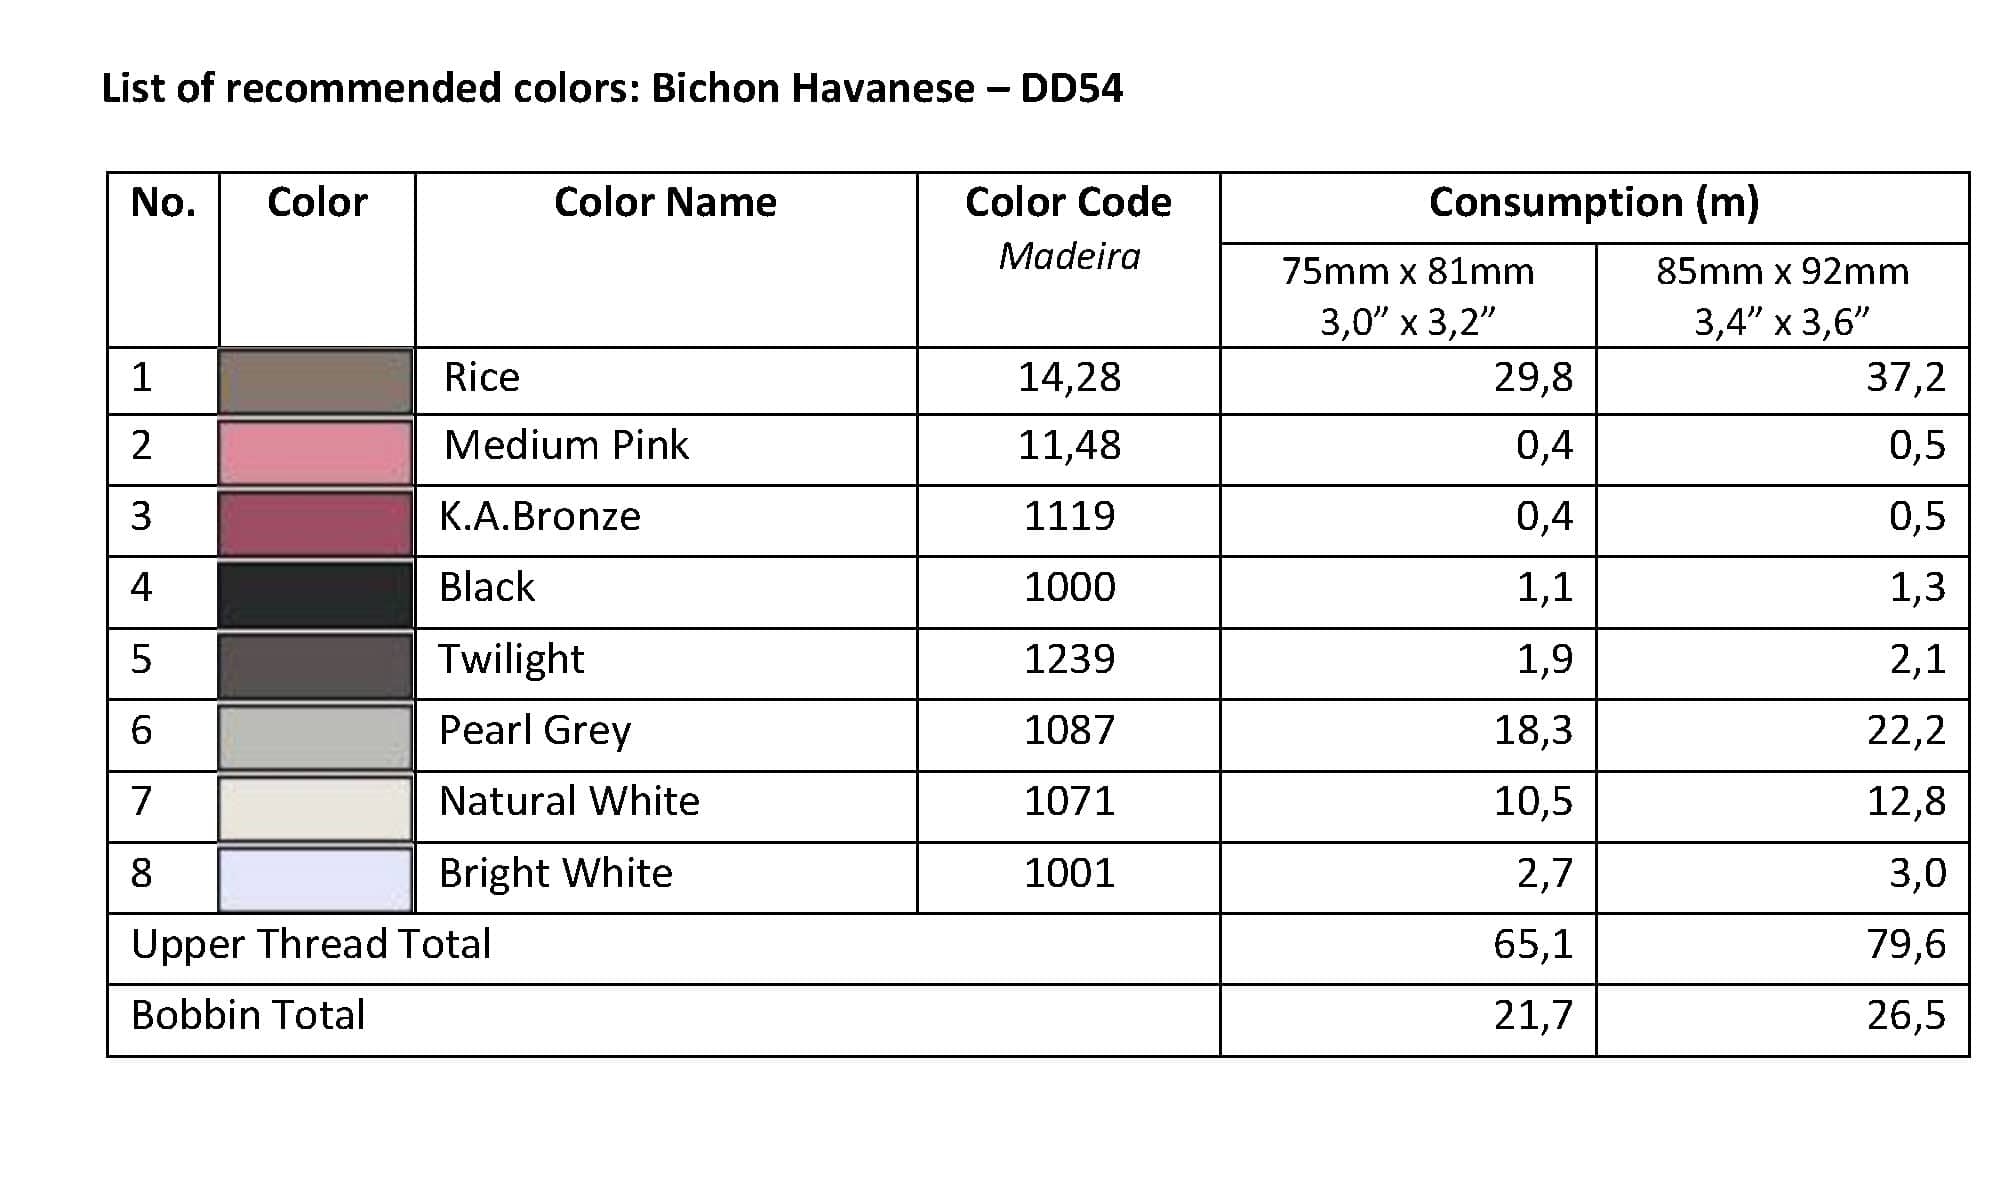 List of Recommended Colors - Bichon Havanese DD54